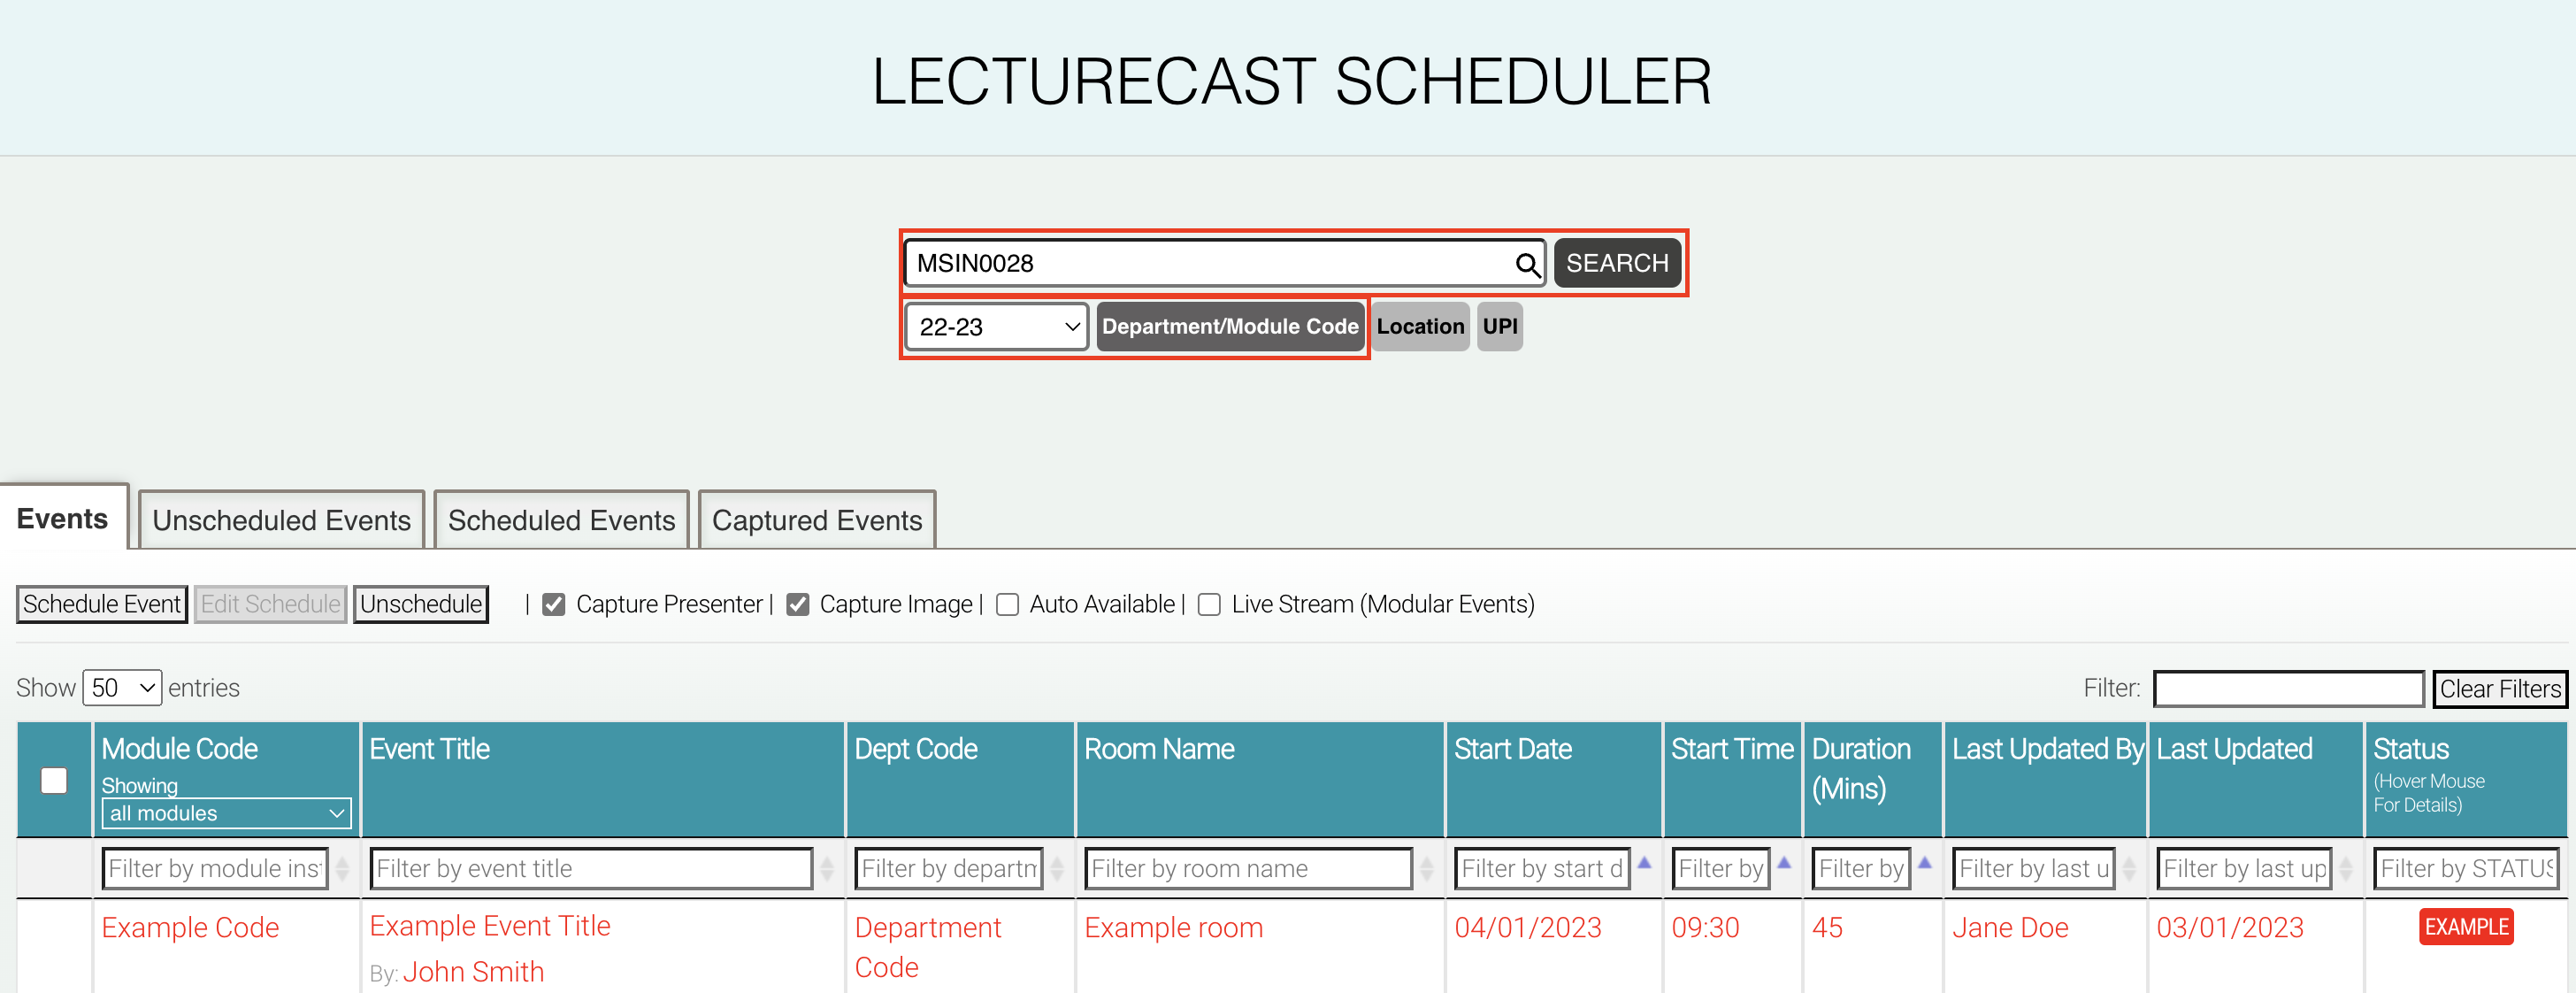 Screenshot of the Lecturecast Scheduler home page with the search bar and search options highlighted 